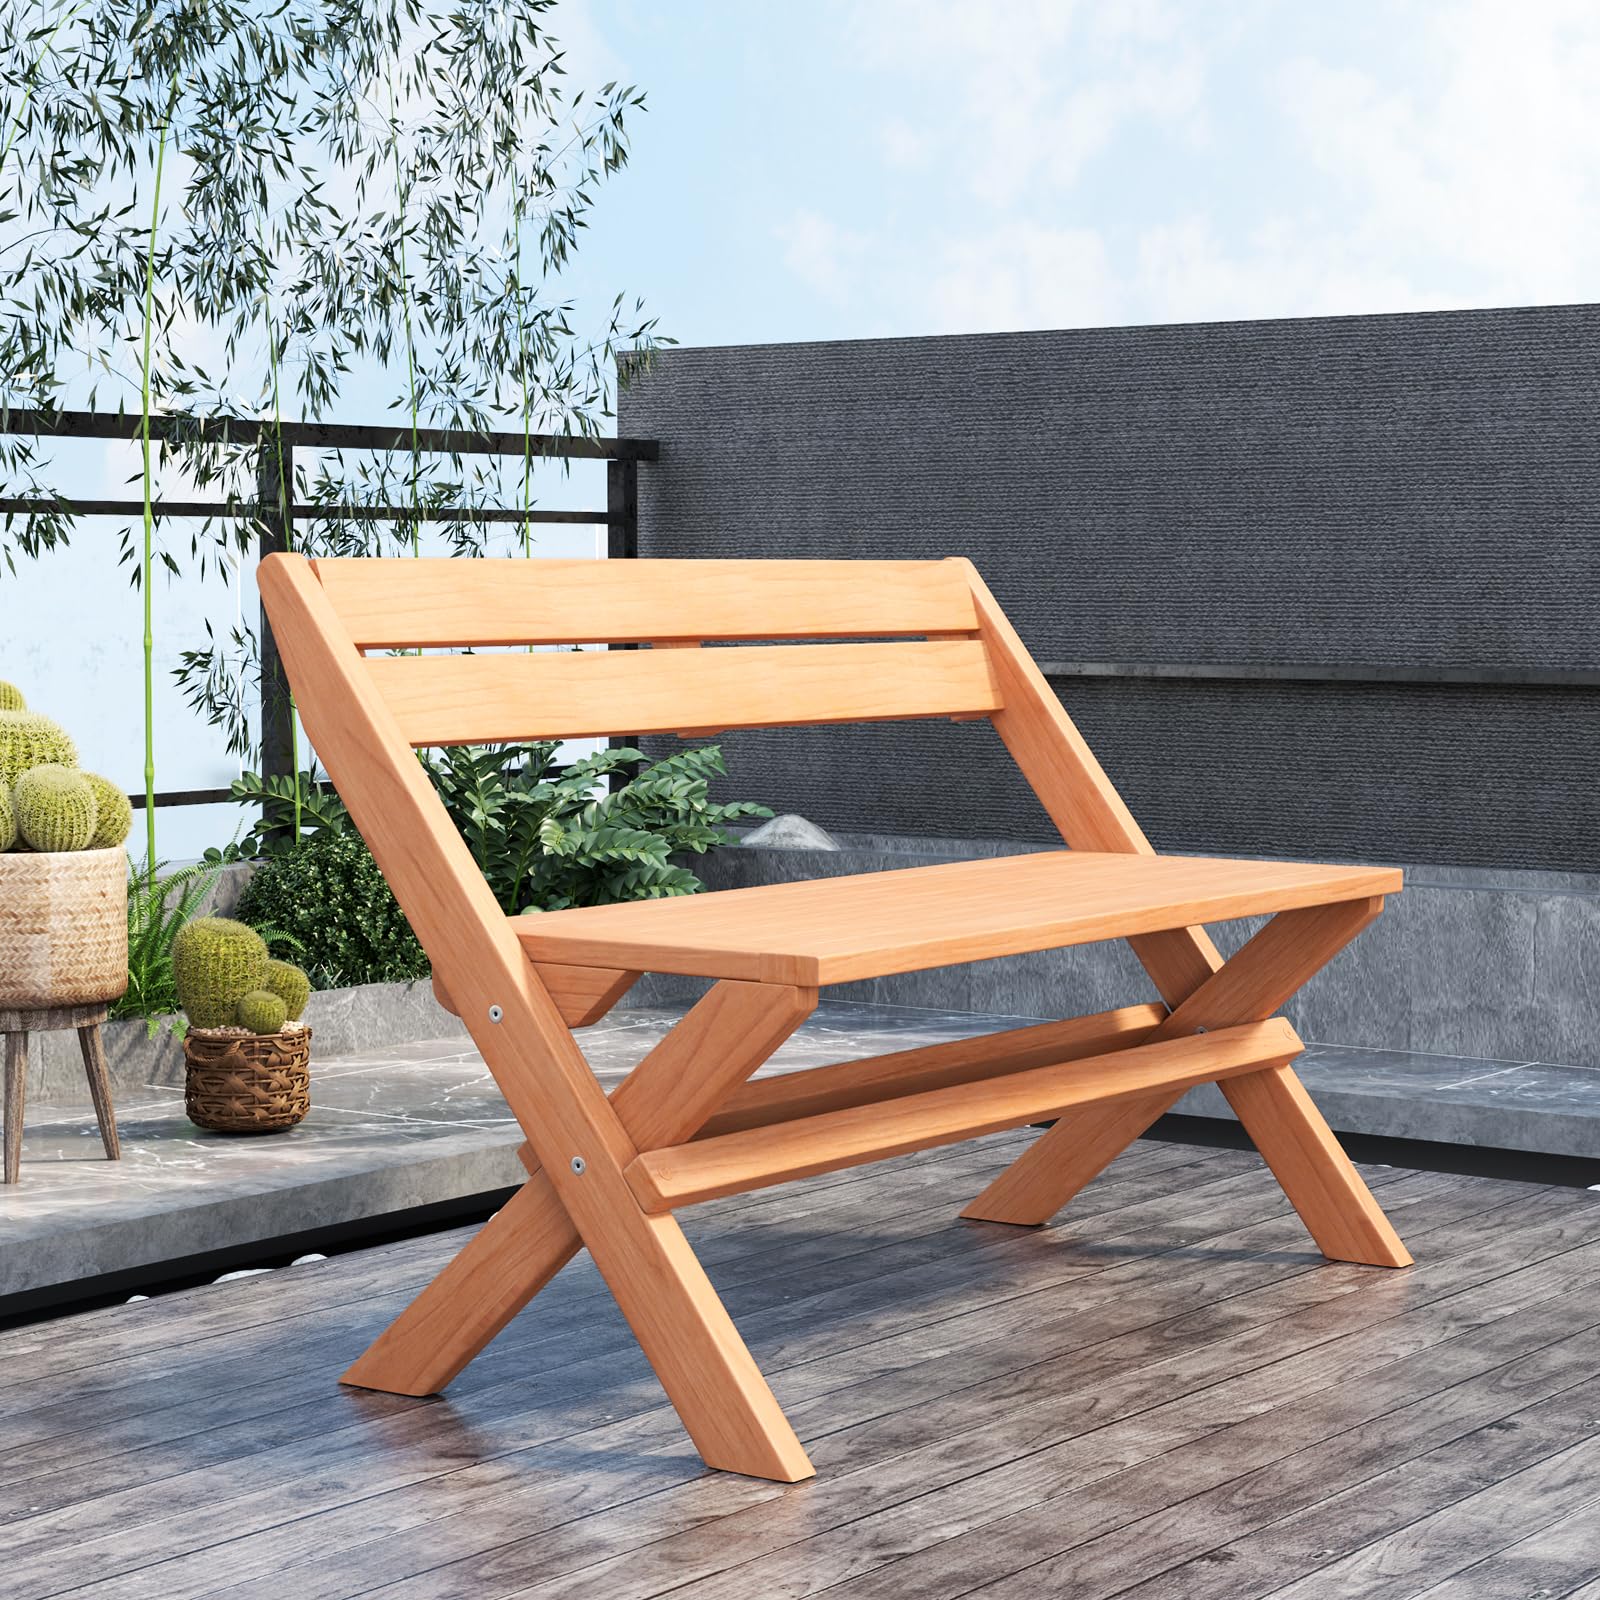 Giantex Wood Outdoor Bench Folding - 2-Person Patio Garden Bench with Solid Teak Wood Structure